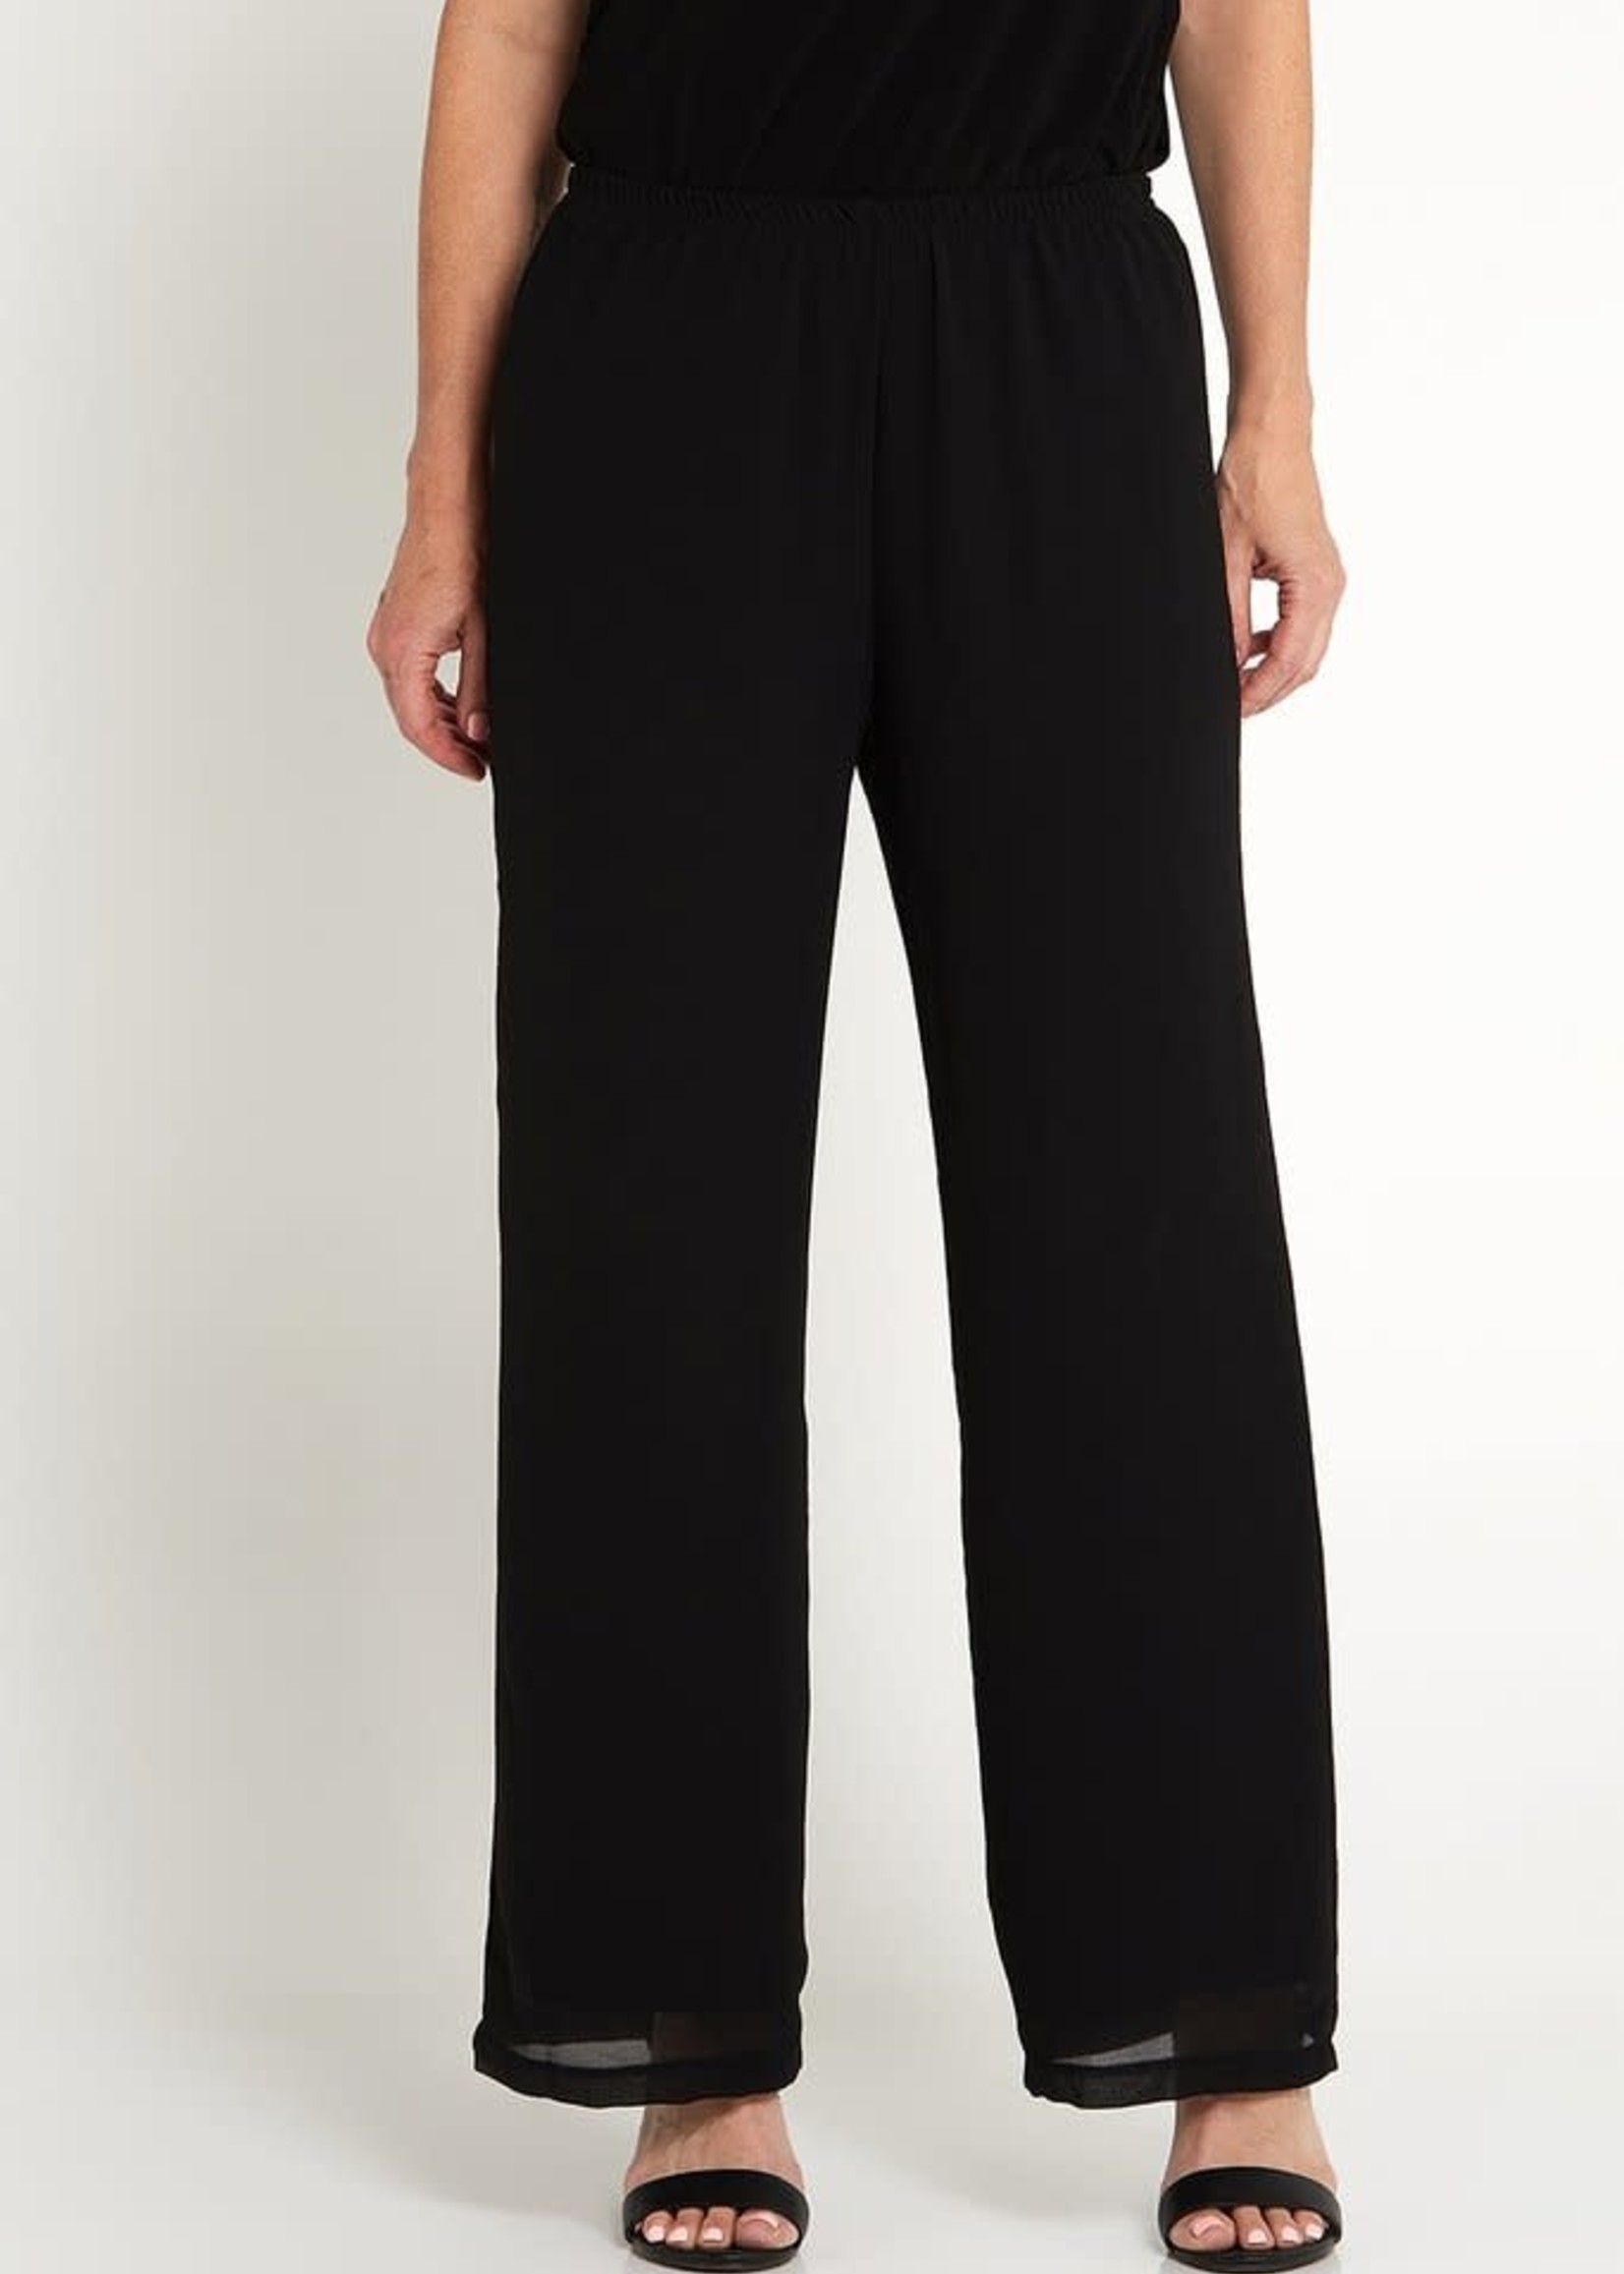 Yes A Dress Black Chiffon Fully Lined Pant with Back Zip